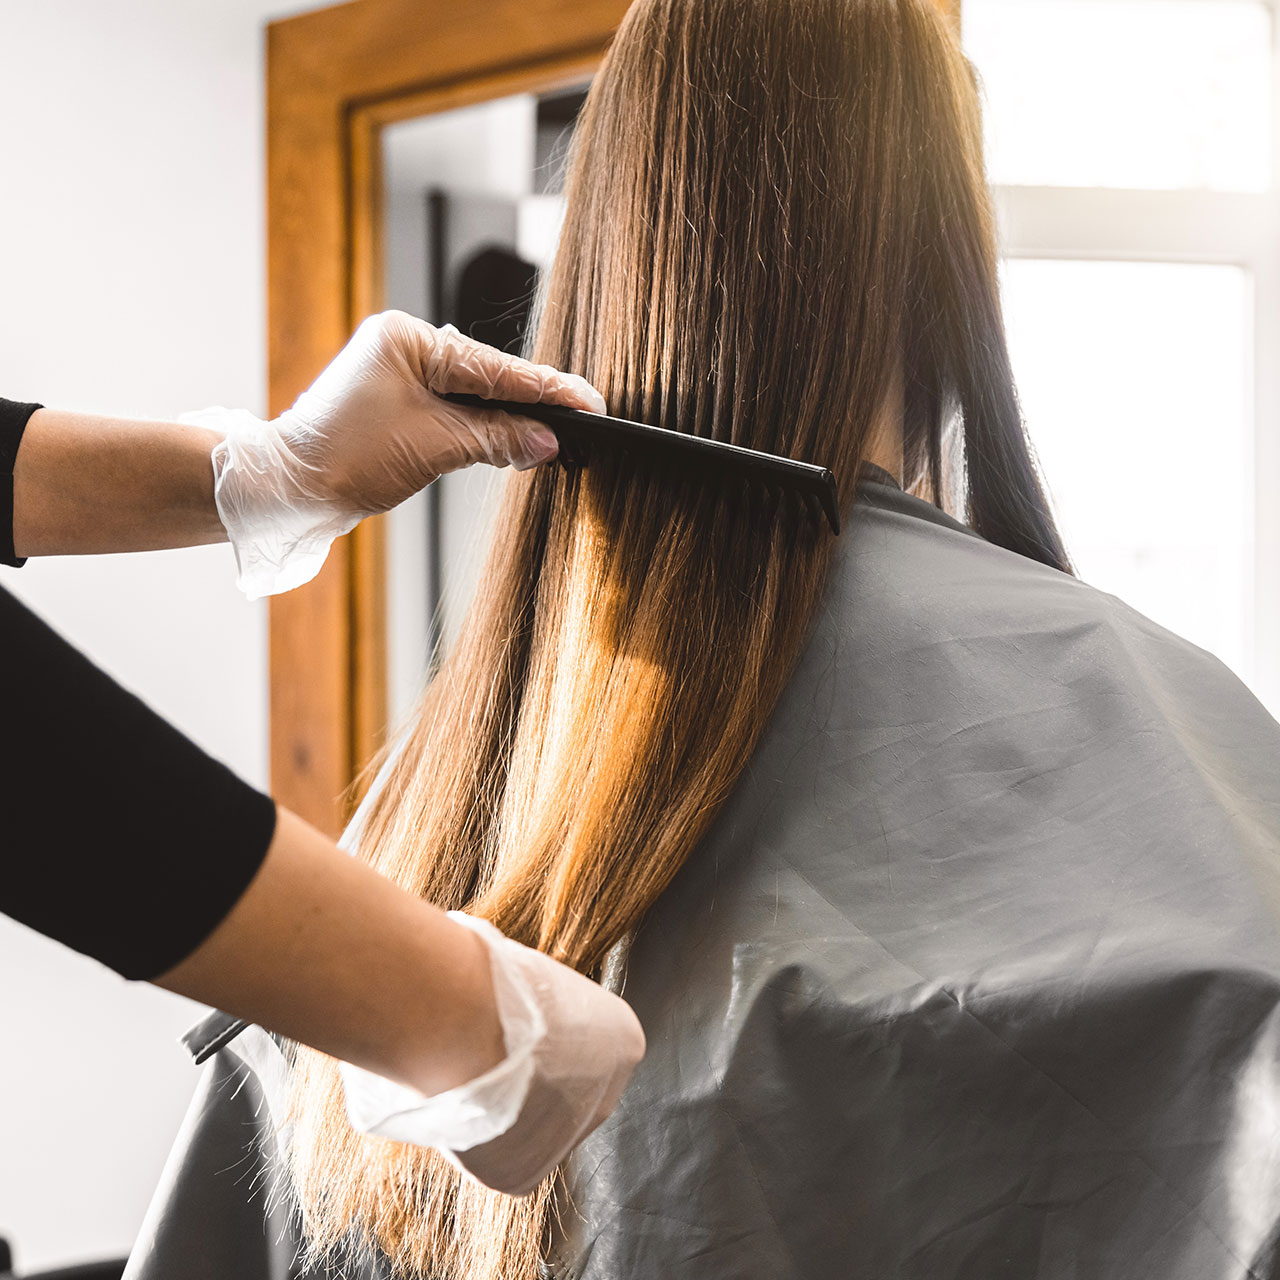 Stylists Share 4 Haircuts That Draw More Attention To Thin, Fine Hair